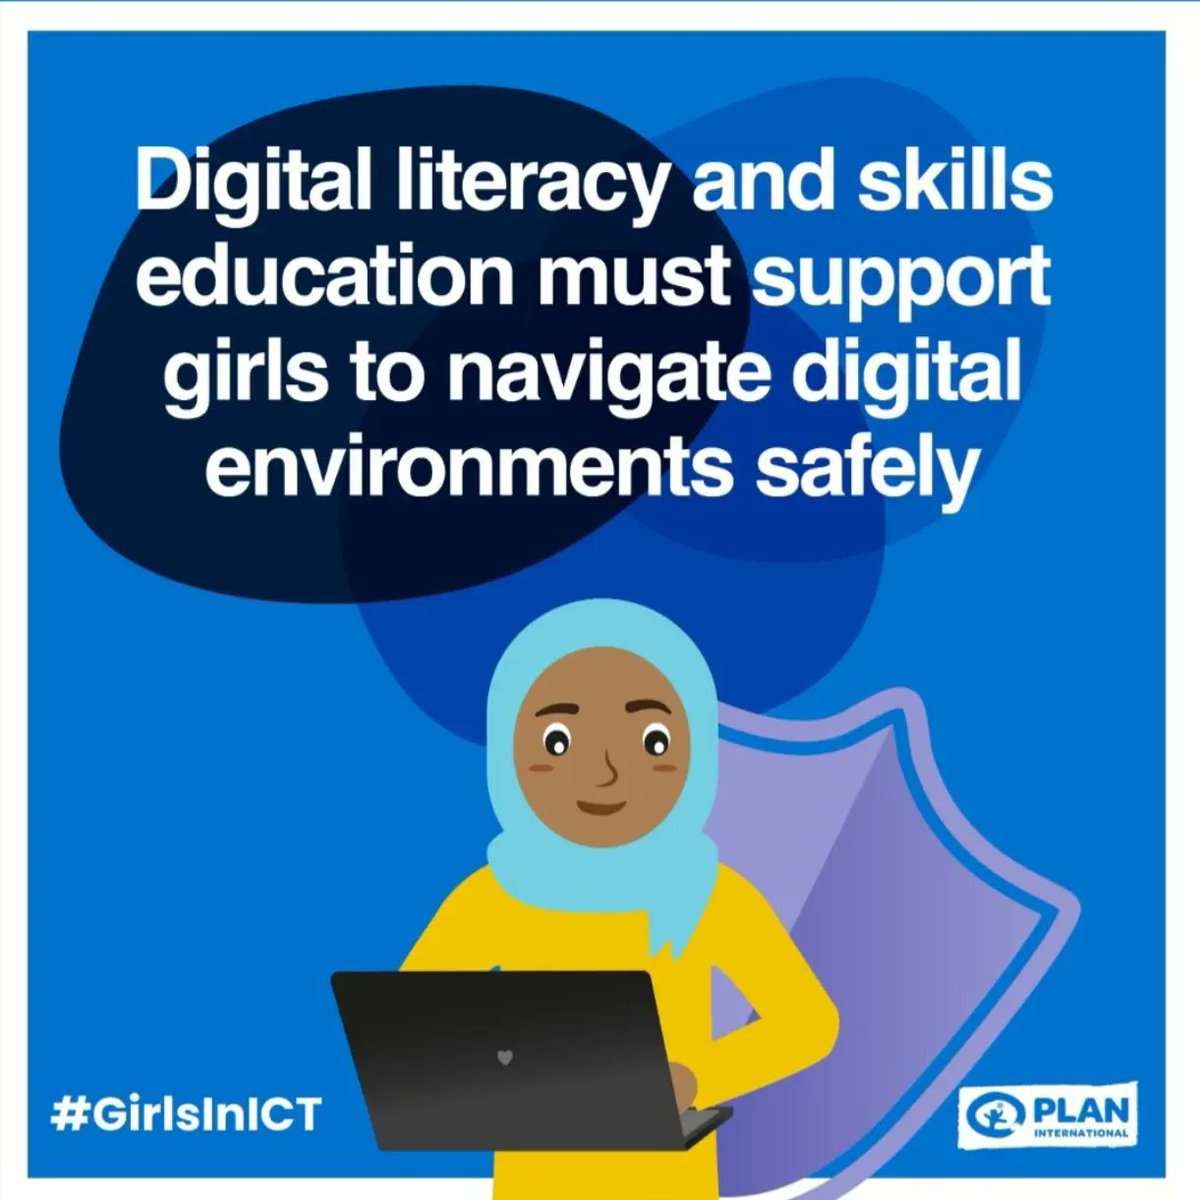 Empowering #GirlsInICT is key to unlocking #qualityeducation for all! By bridging the digital gender gap, we ensure every girl has equal access to opportunities, knowledge, and relevant skills needed to thrive in today's digital age.